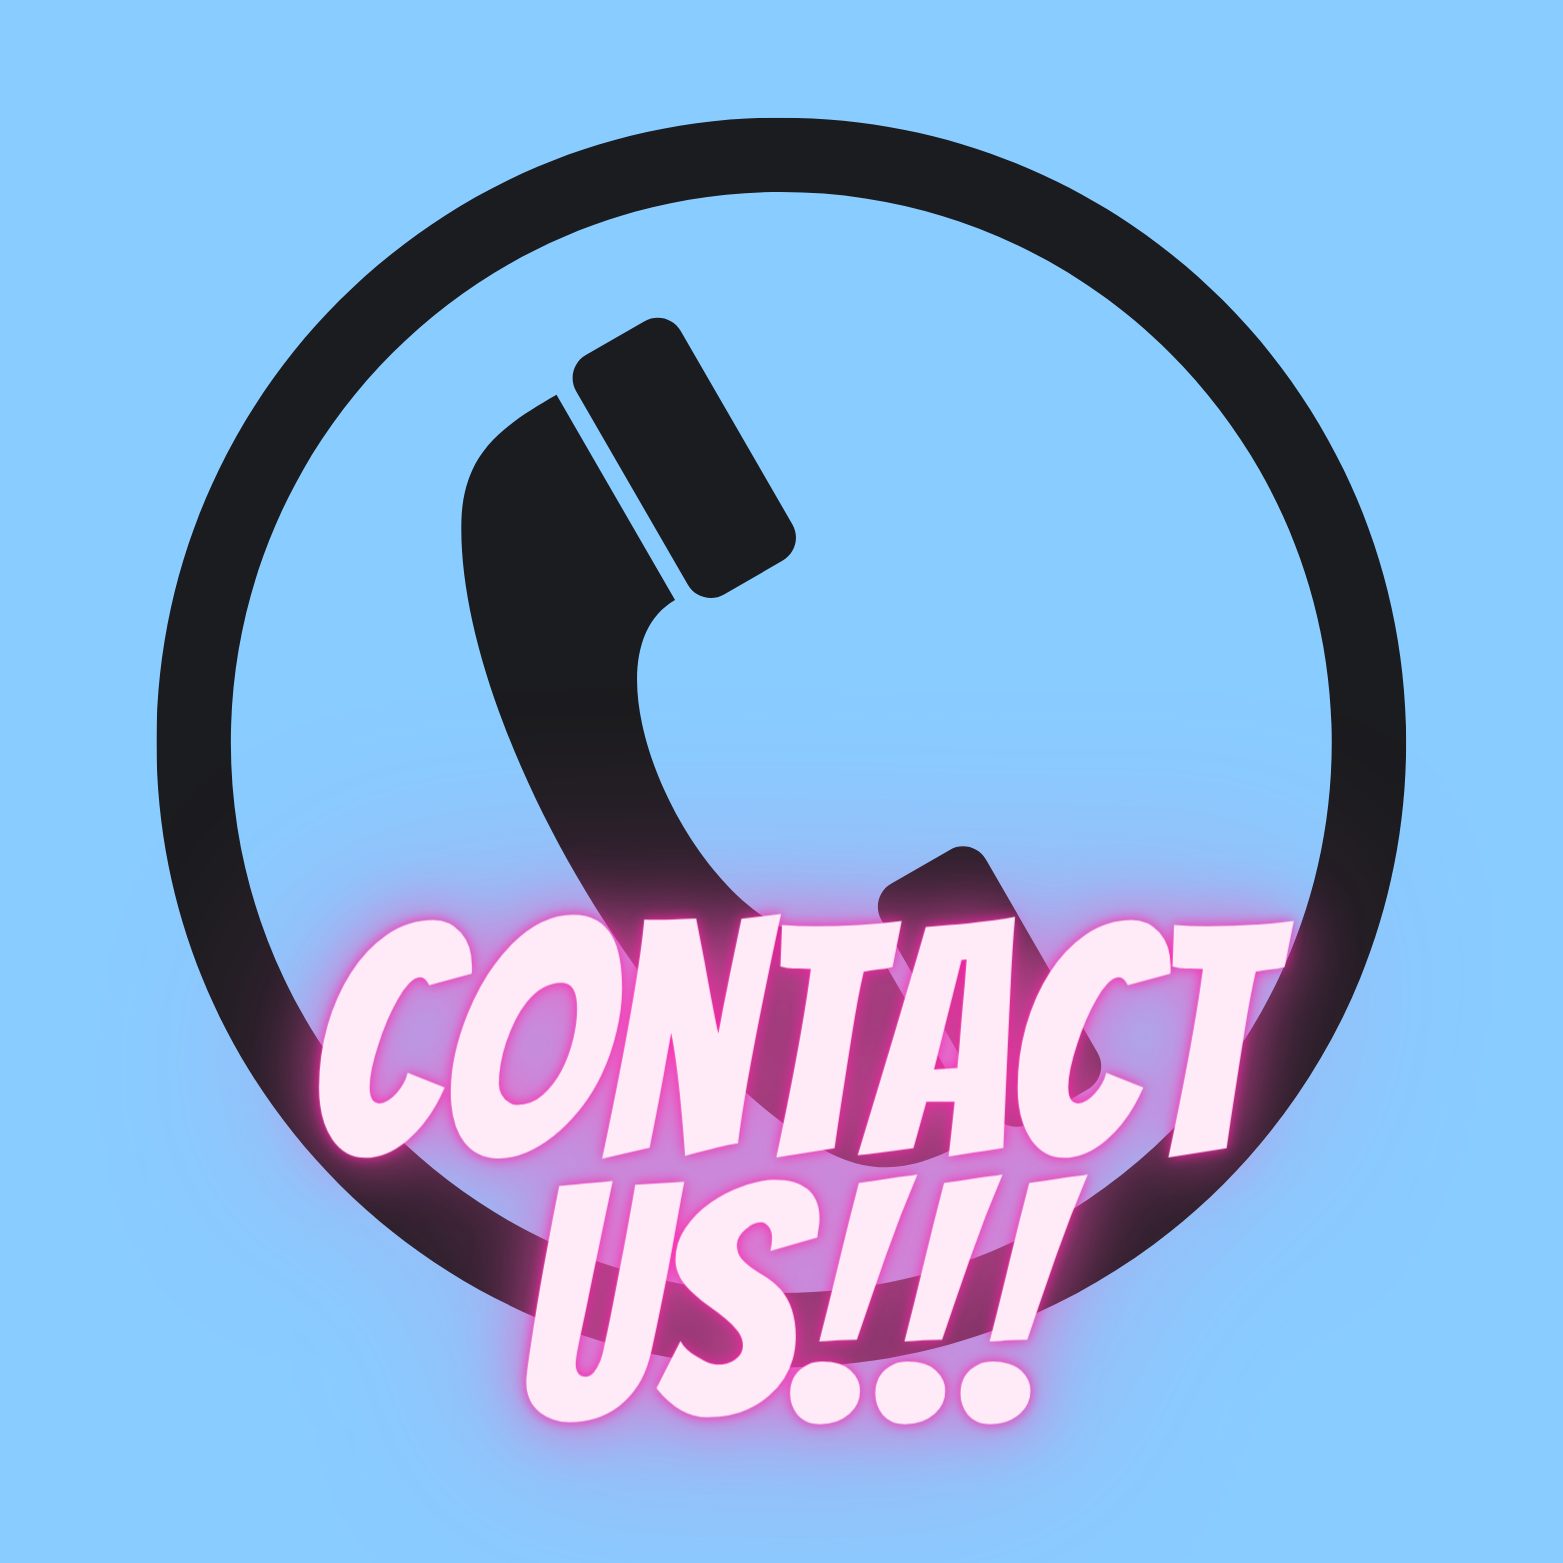 An image showing the words 'Contact Us' and a phone icon